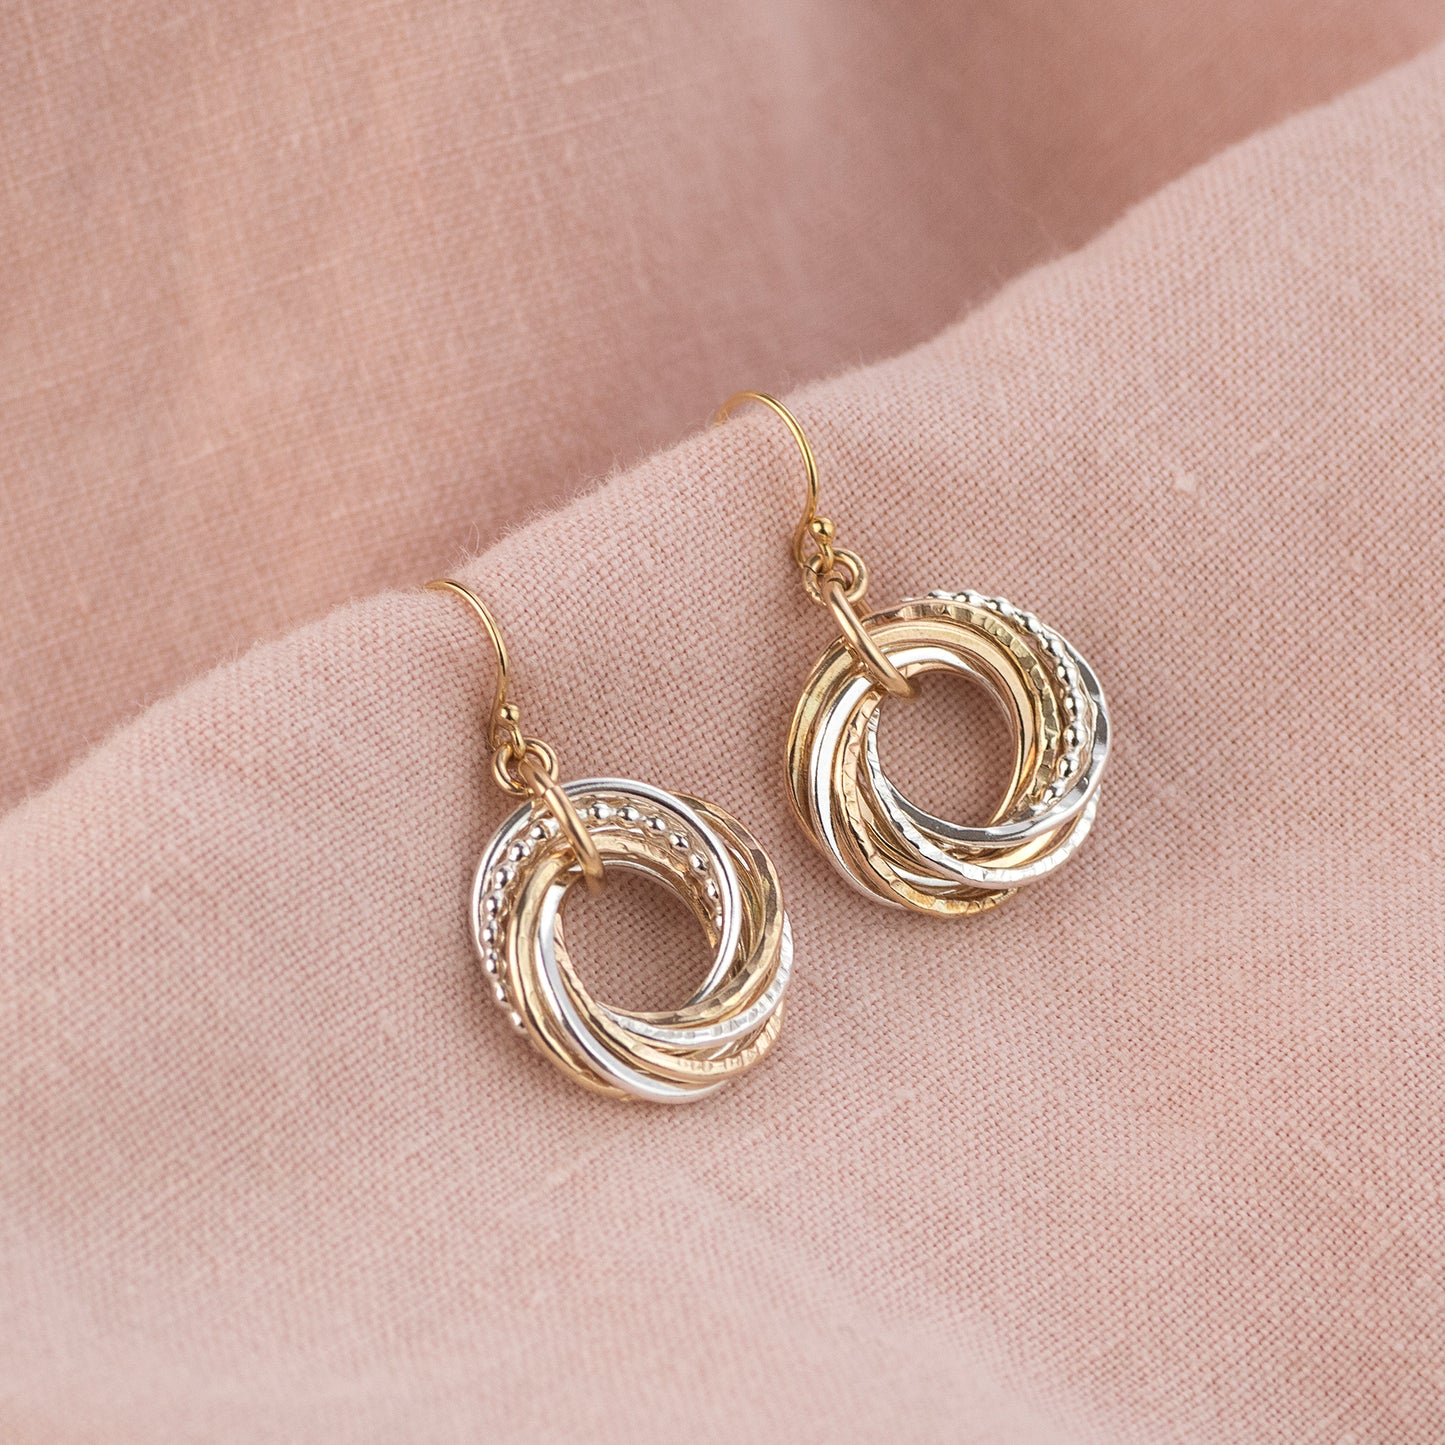 90th Birthday Earrings - The Original 9 Links for 9 Decades Earrings - Petite Silver & Gold